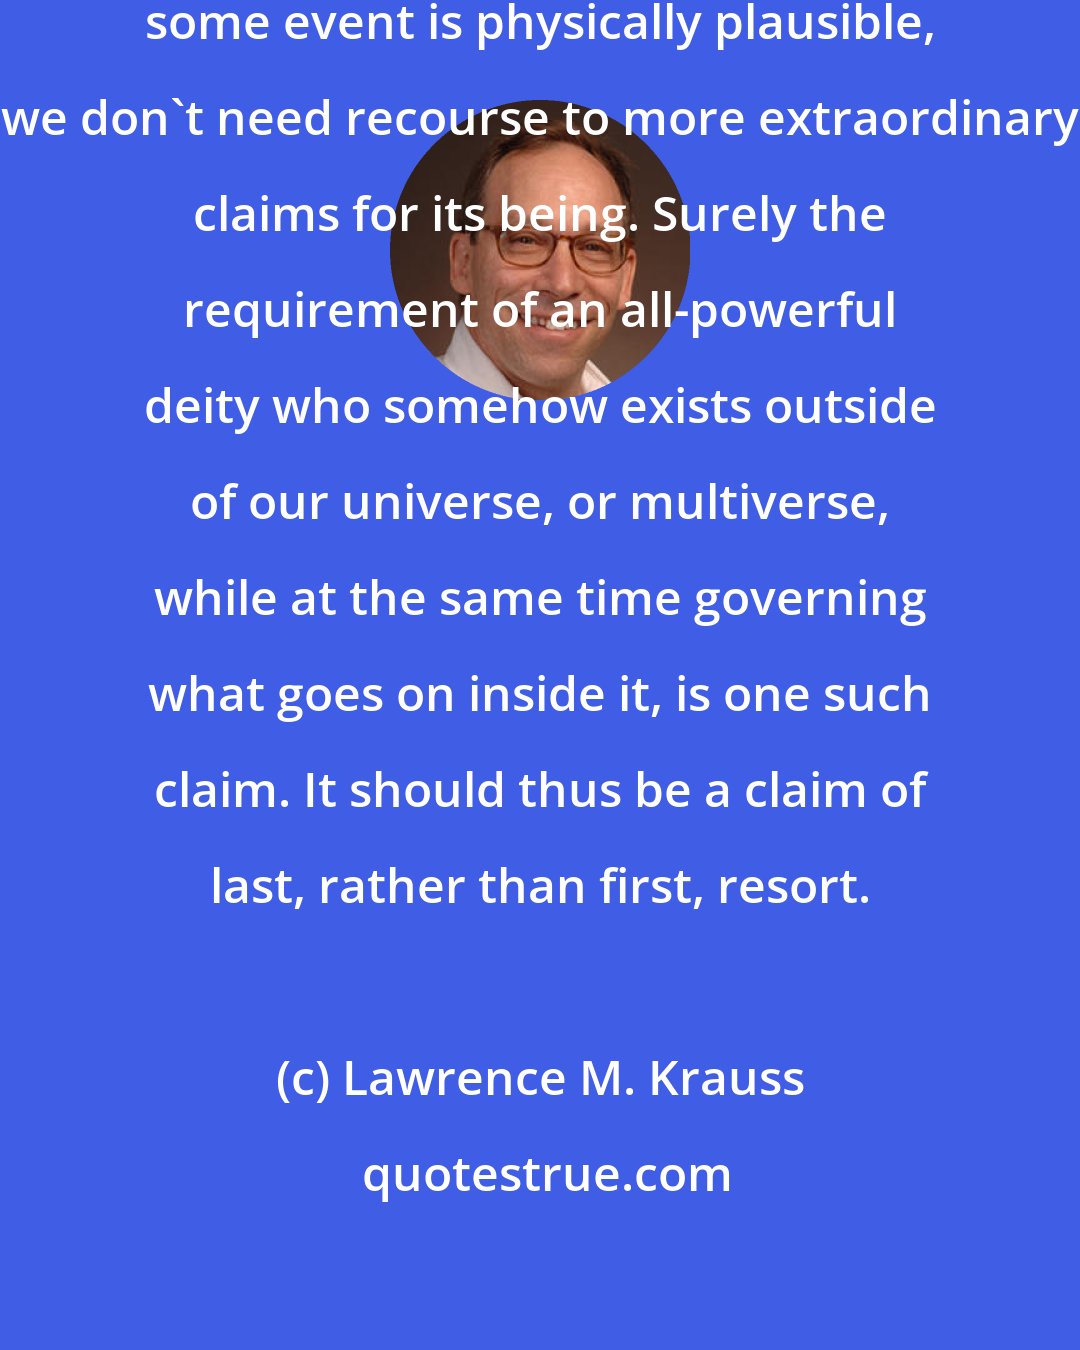 Lawrence M. Krauss: Occam's razor suggests that, if some event is physically plausible, we don't need recourse to more extraordinary claims for its being. Surely the requirement of an all-powerful deity who somehow exists outside of our universe, or multiverse, while at the same time governing what goes on inside it, is one such claim. It should thus be a claim of last, rather than first, resort.